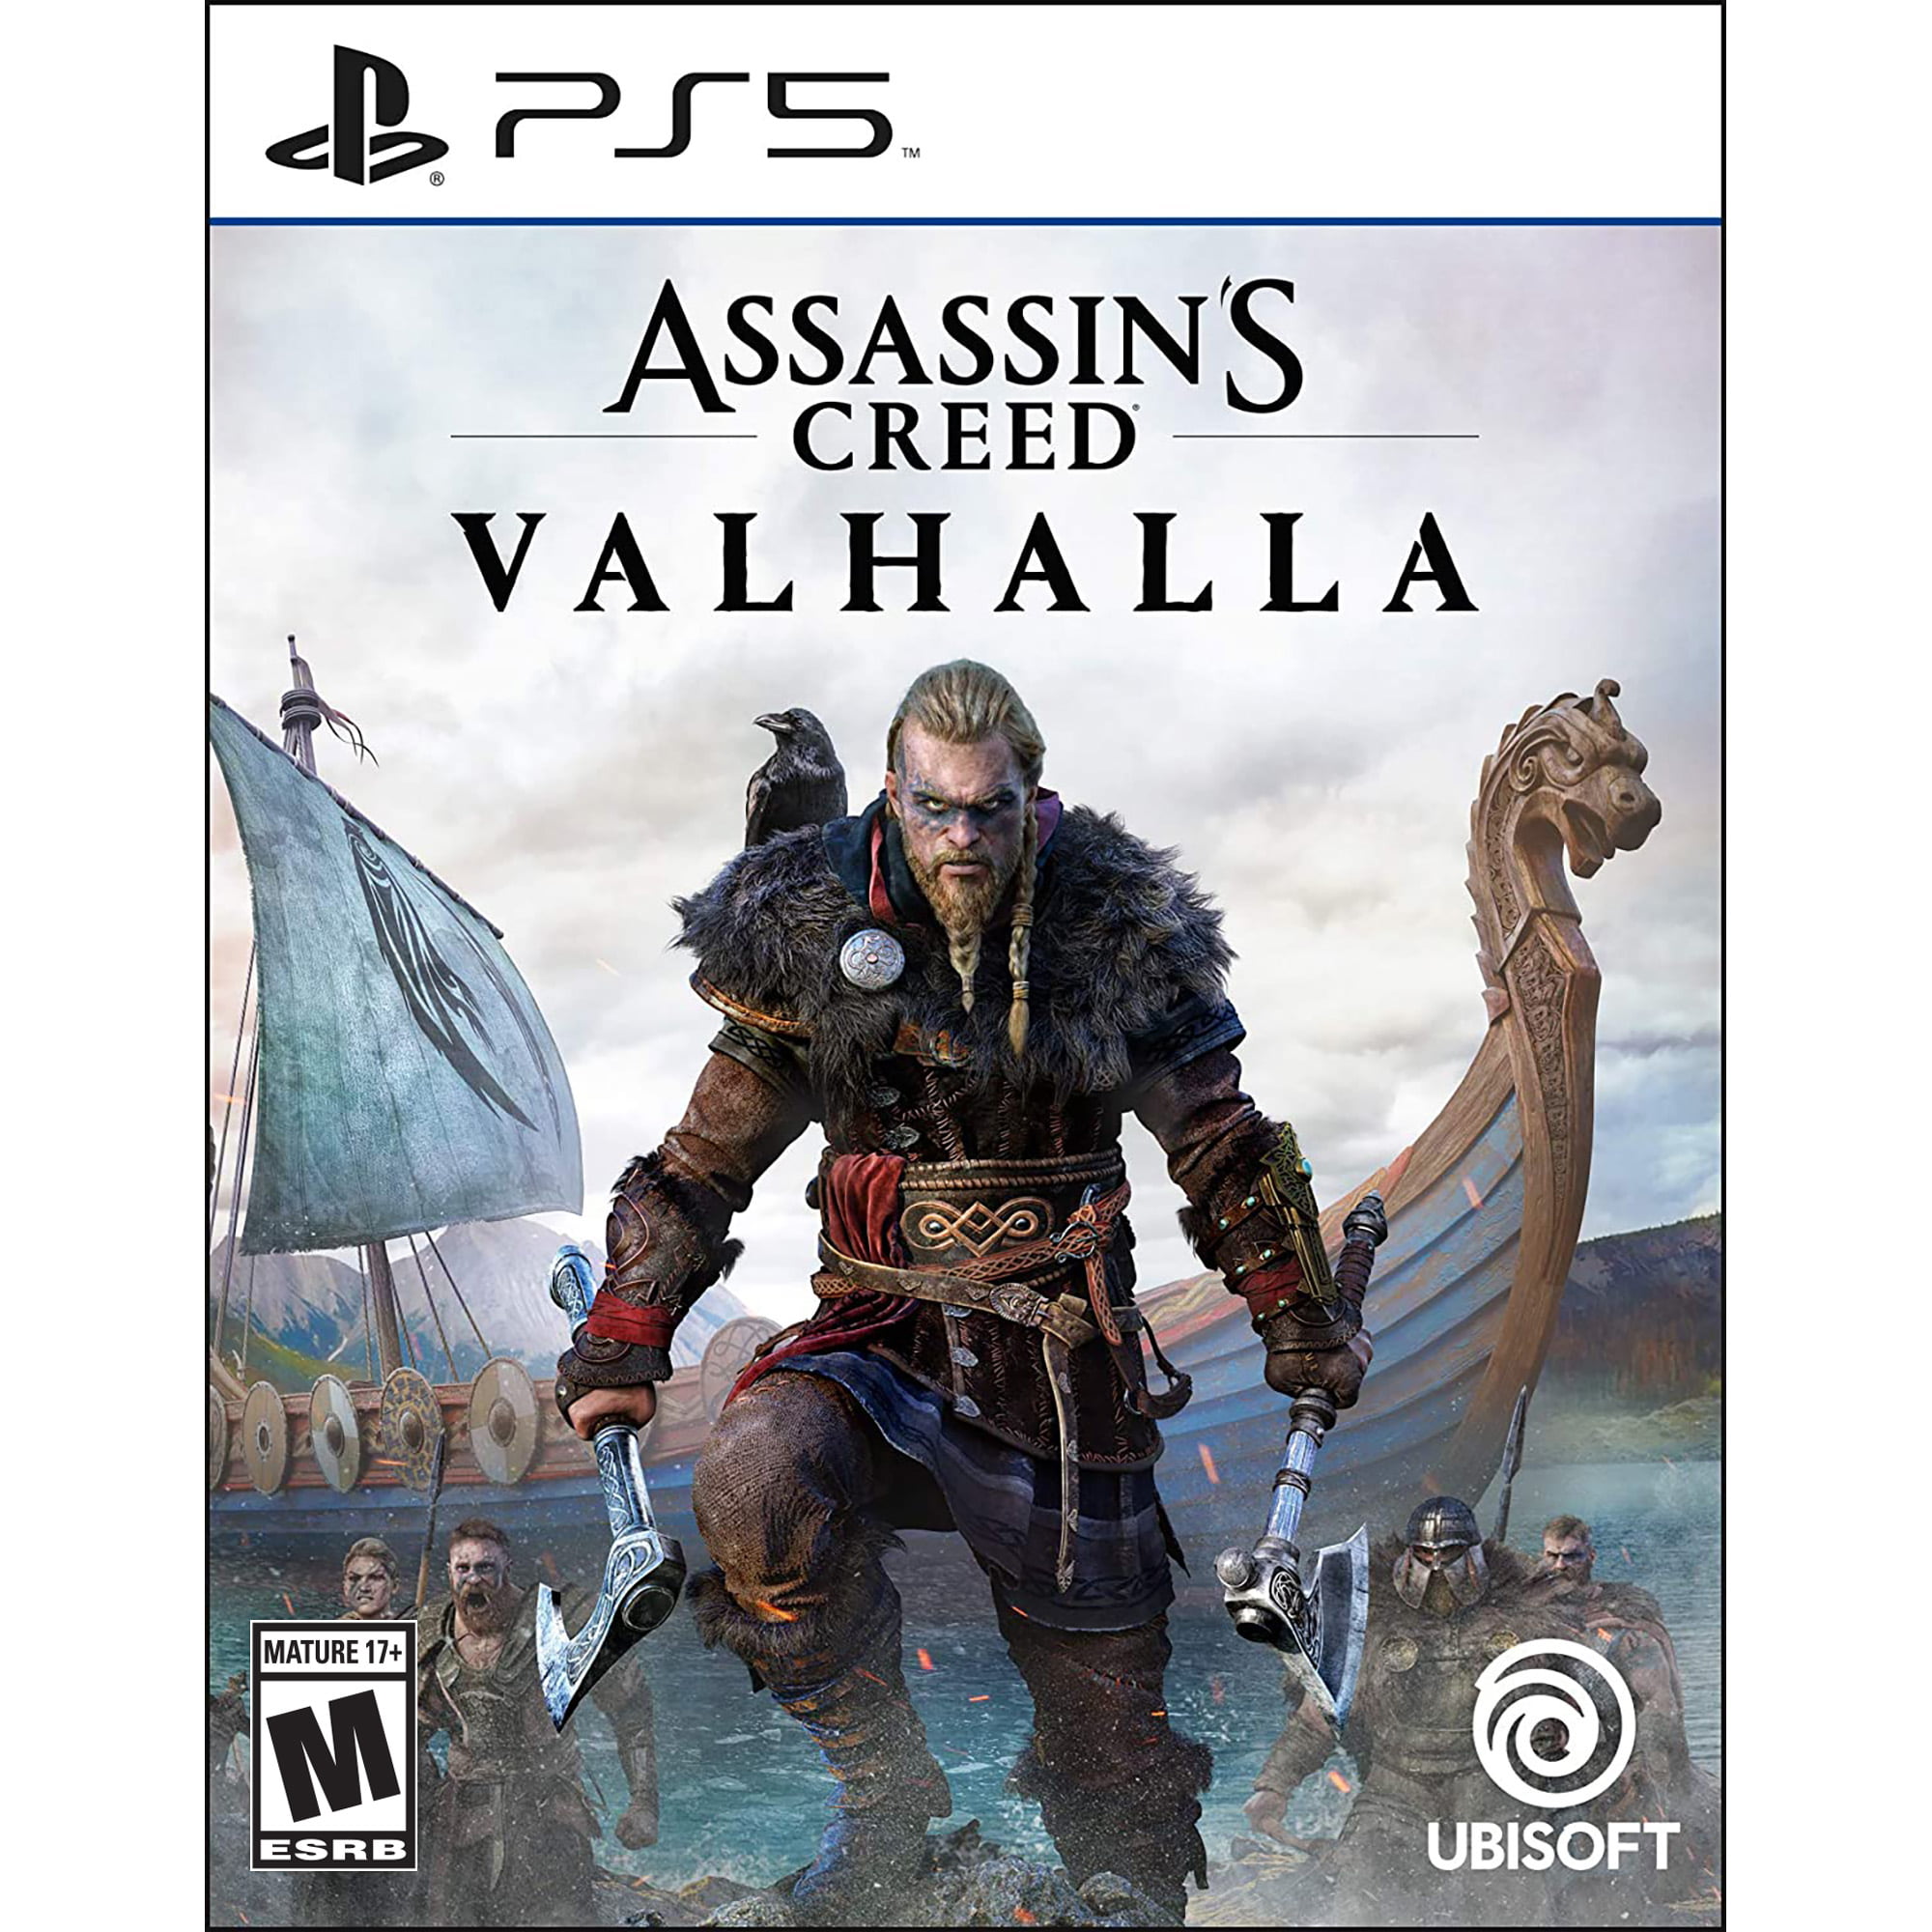 Assassin's Creed Valhalla Standard Edition - PlayStation 5 $19 + Free S&H w/ Walmart+ or $35+